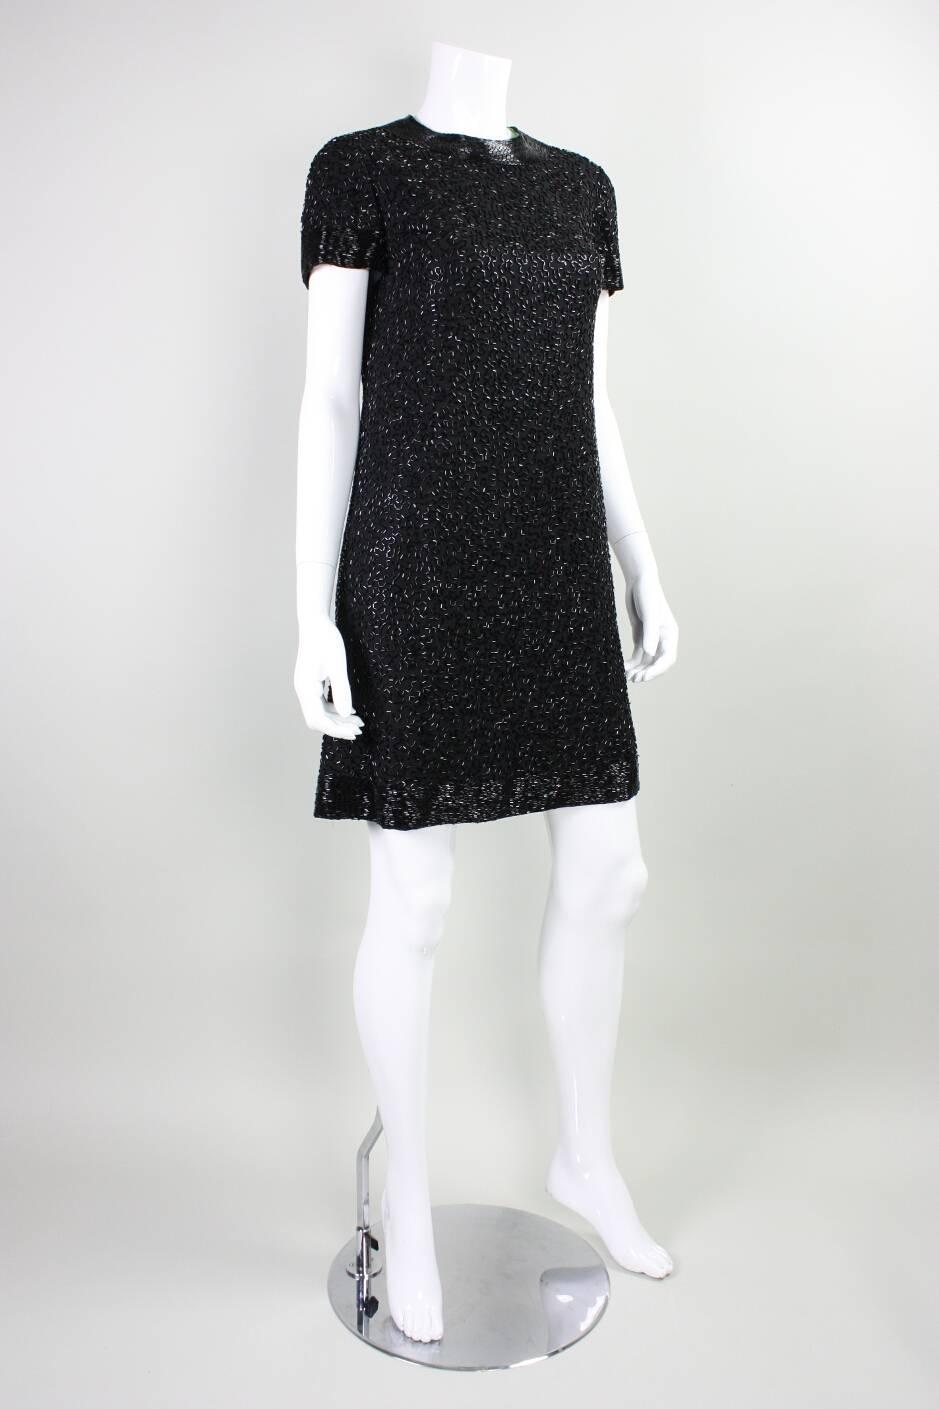 1960's Larry Aldrich Black Beaded Cocktail Dress In Excellent Condition For Sale In Los Angeles, CA